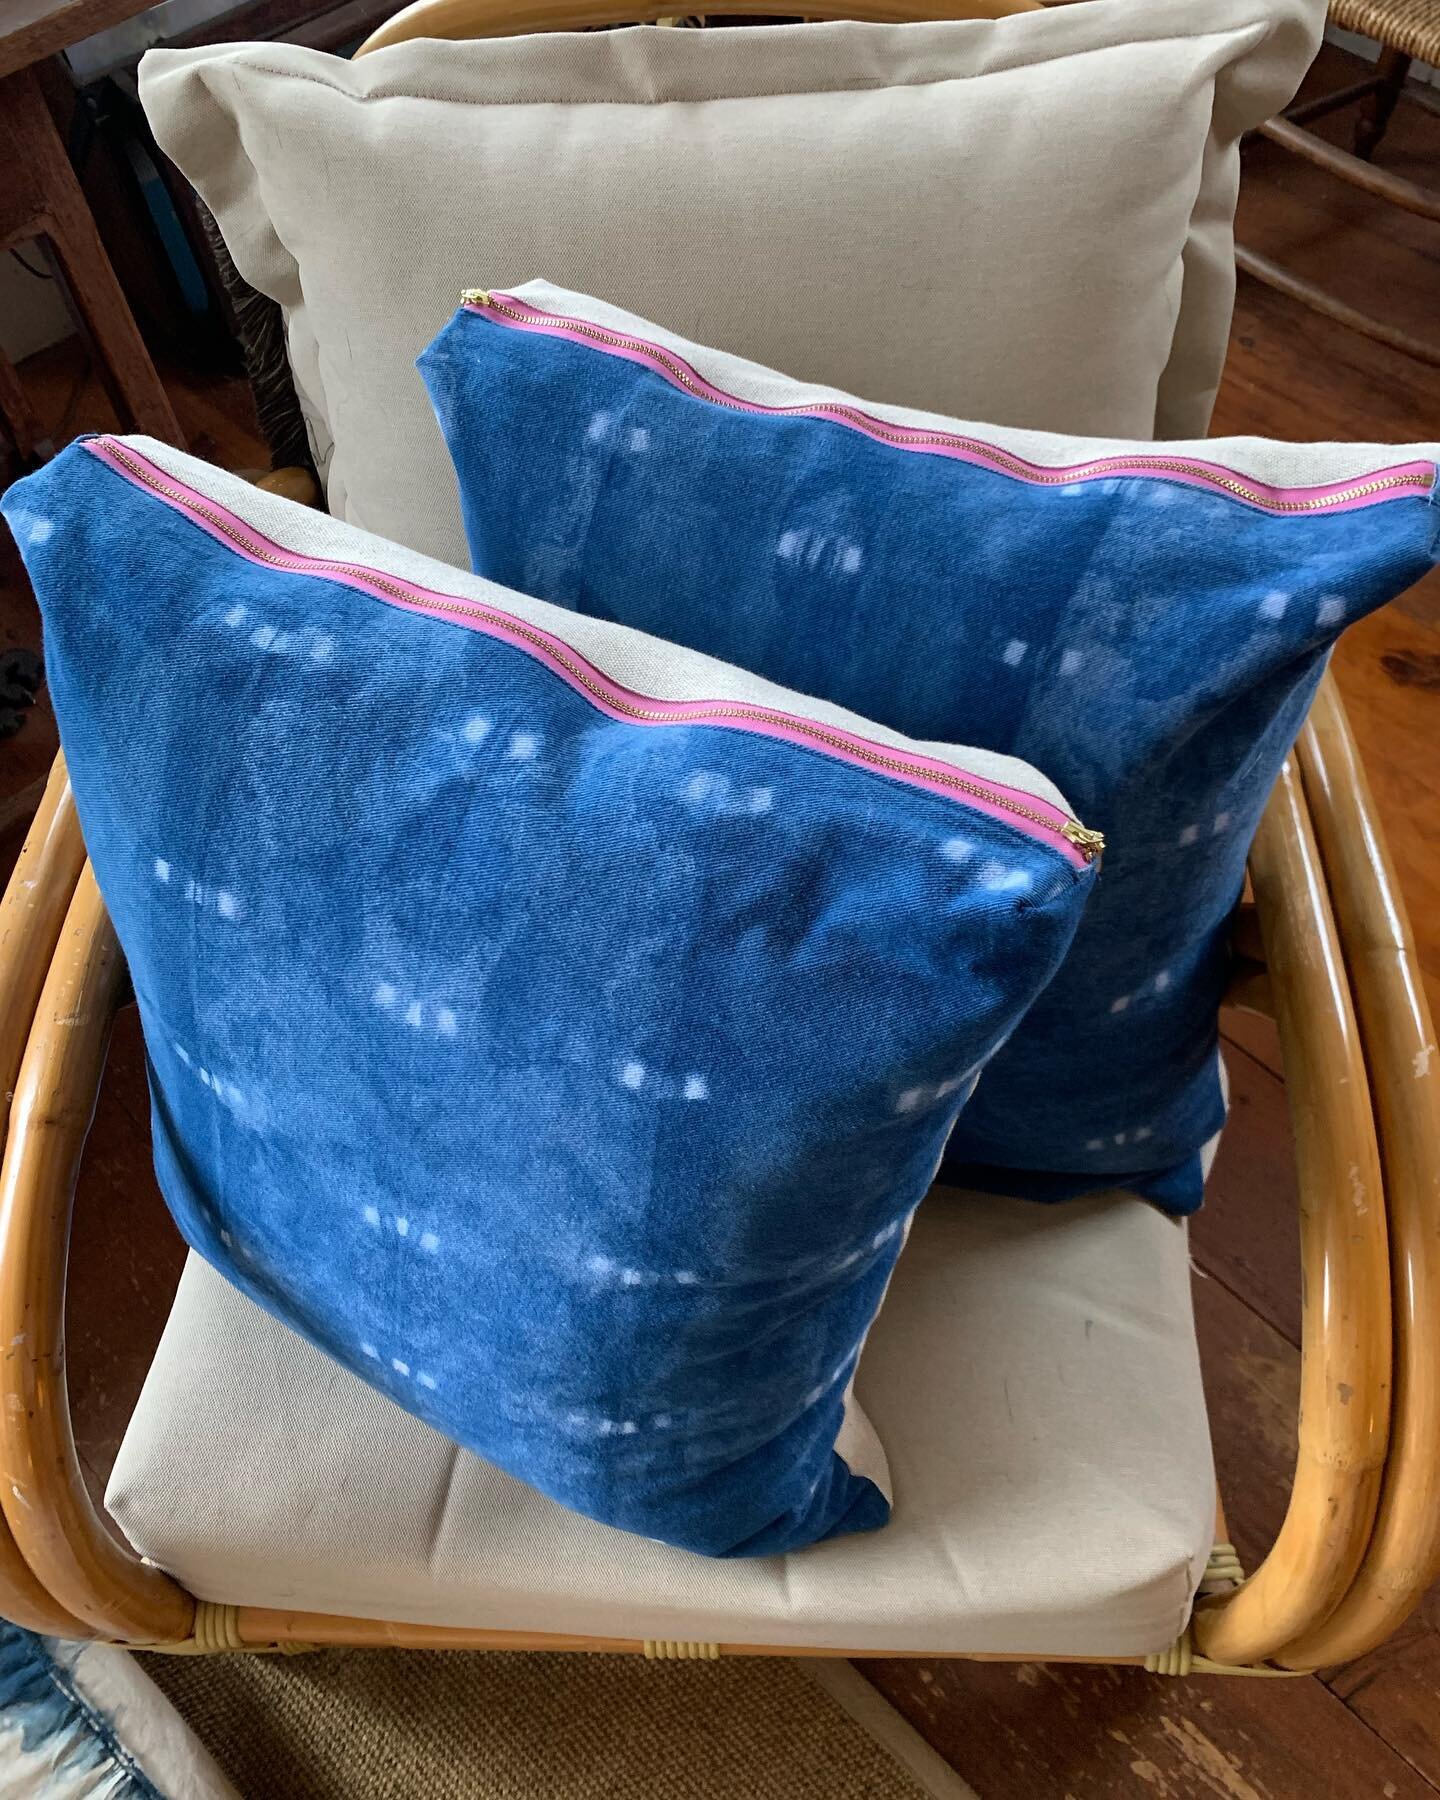 💗 Creating the perfect Pillow for the Perfect place 💙
Take a look at the process - fabric to sewing to special zippers to make them pop @sullivanstrim  to a special friends apartment! #nantucketstyle #nantucket #indigogypsyinDC #indigo #shibori #fa